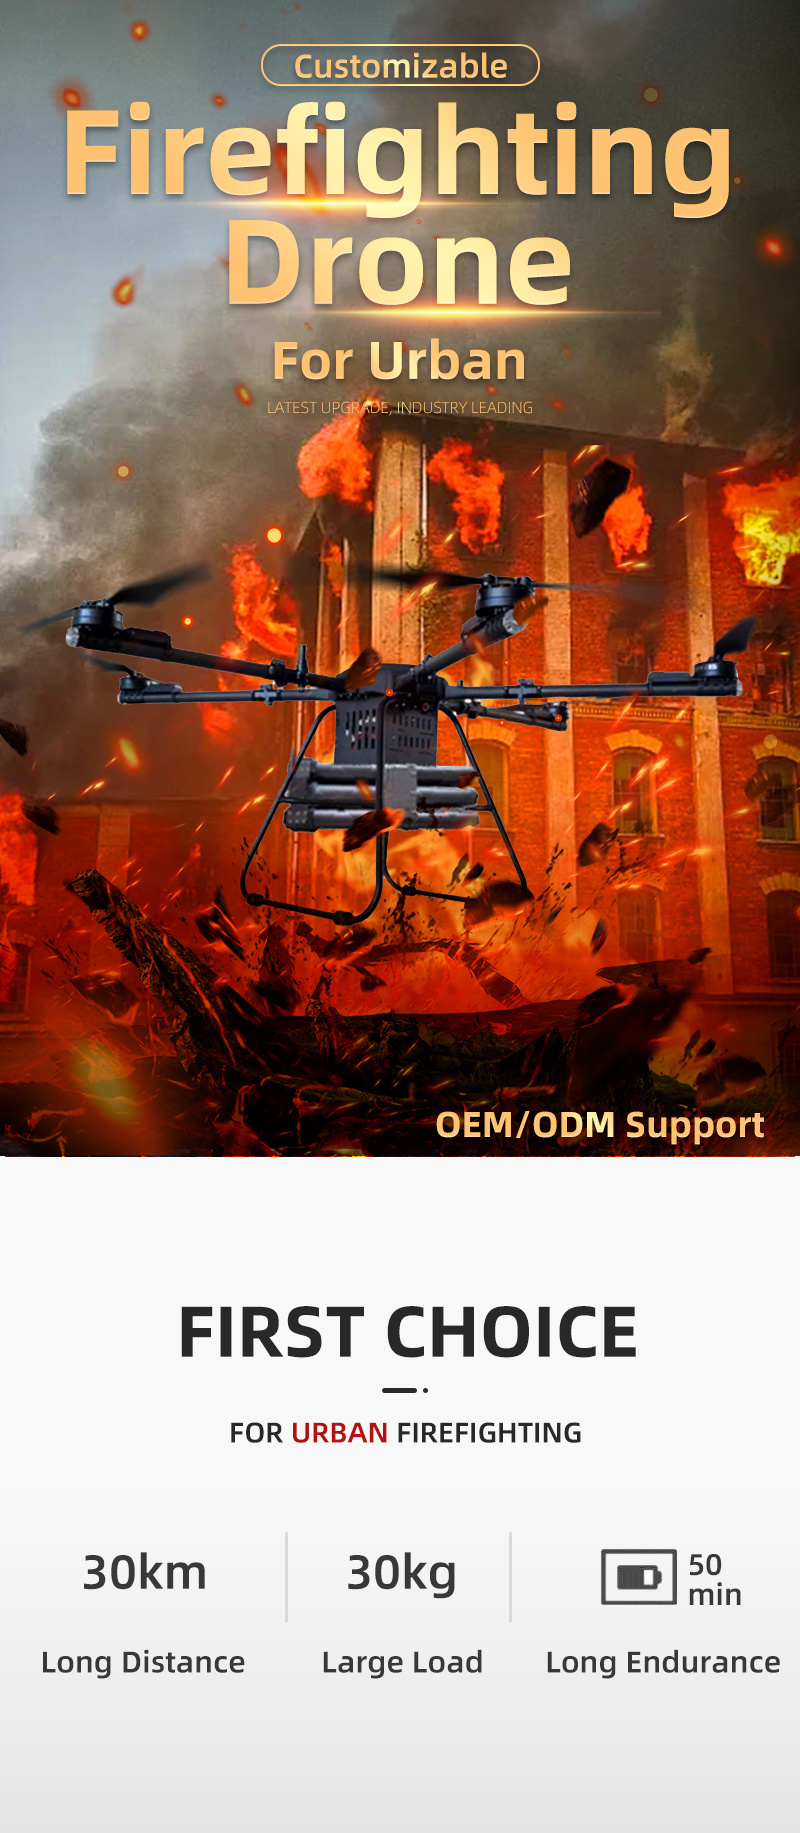 Emergency Use 30kg Payload Firefighting Industrial Drone with Price